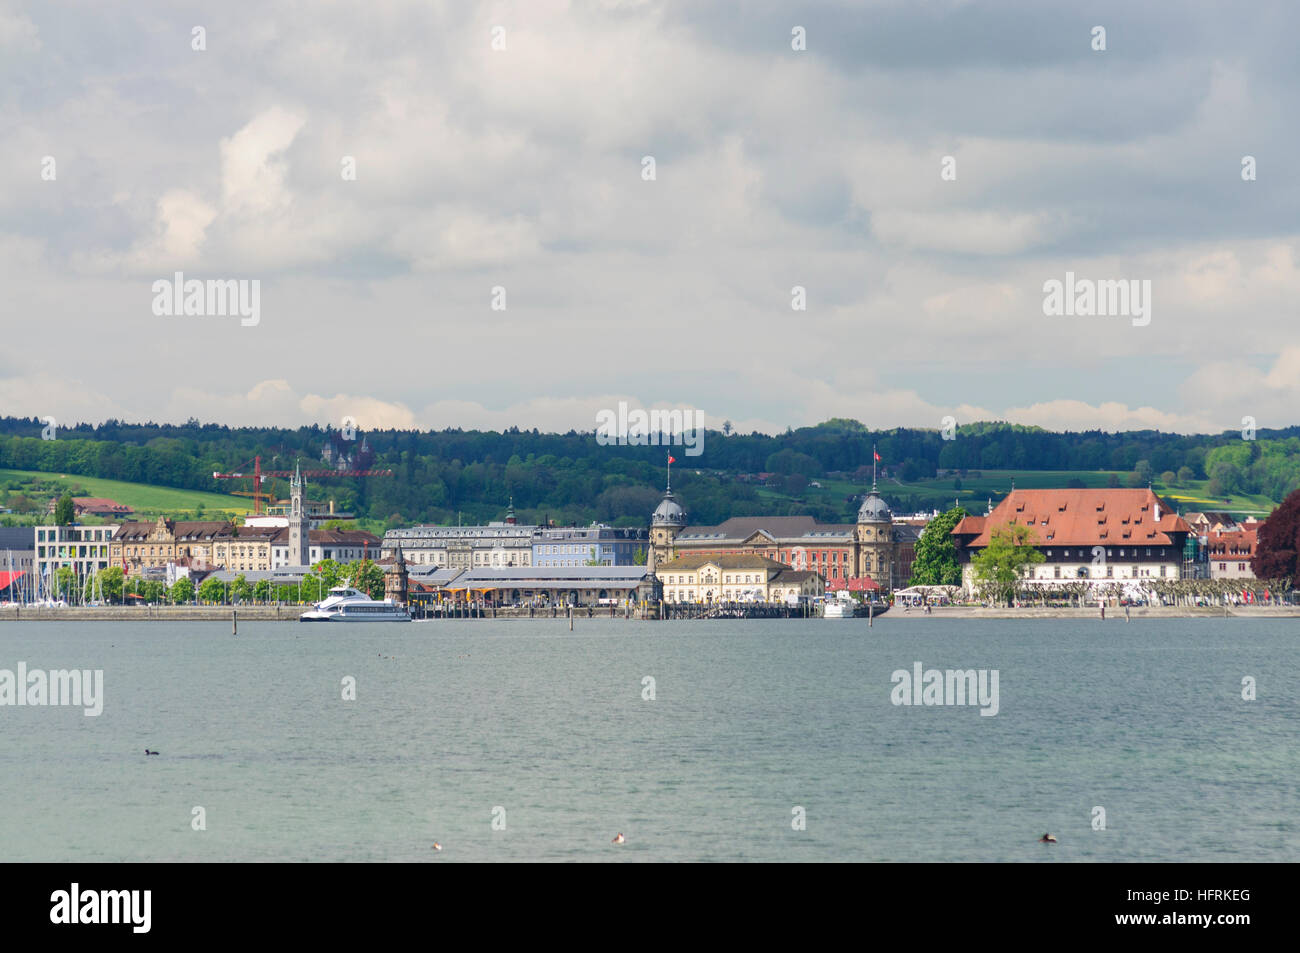 Konstanz, Constance: Lake Constance with a view of Constance, on the right the Council Building, Bodensee, Lake Constance, Baden-Württemberg, Germany Stock Photo